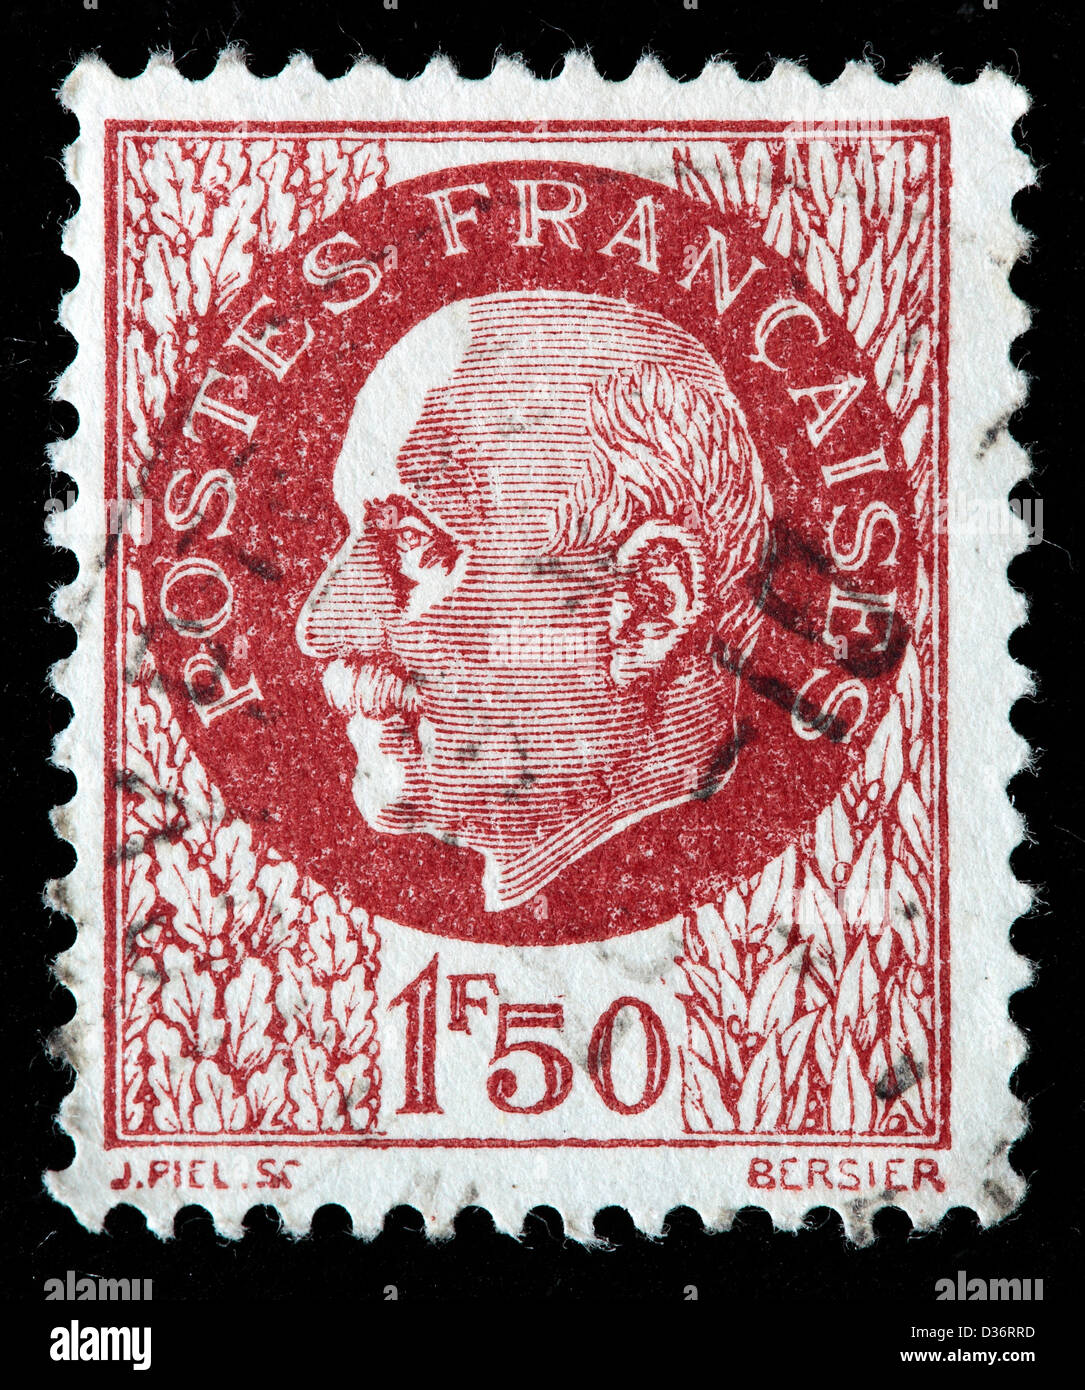 Marshal Petain, postage stamp, France, 1942 Stock Photo